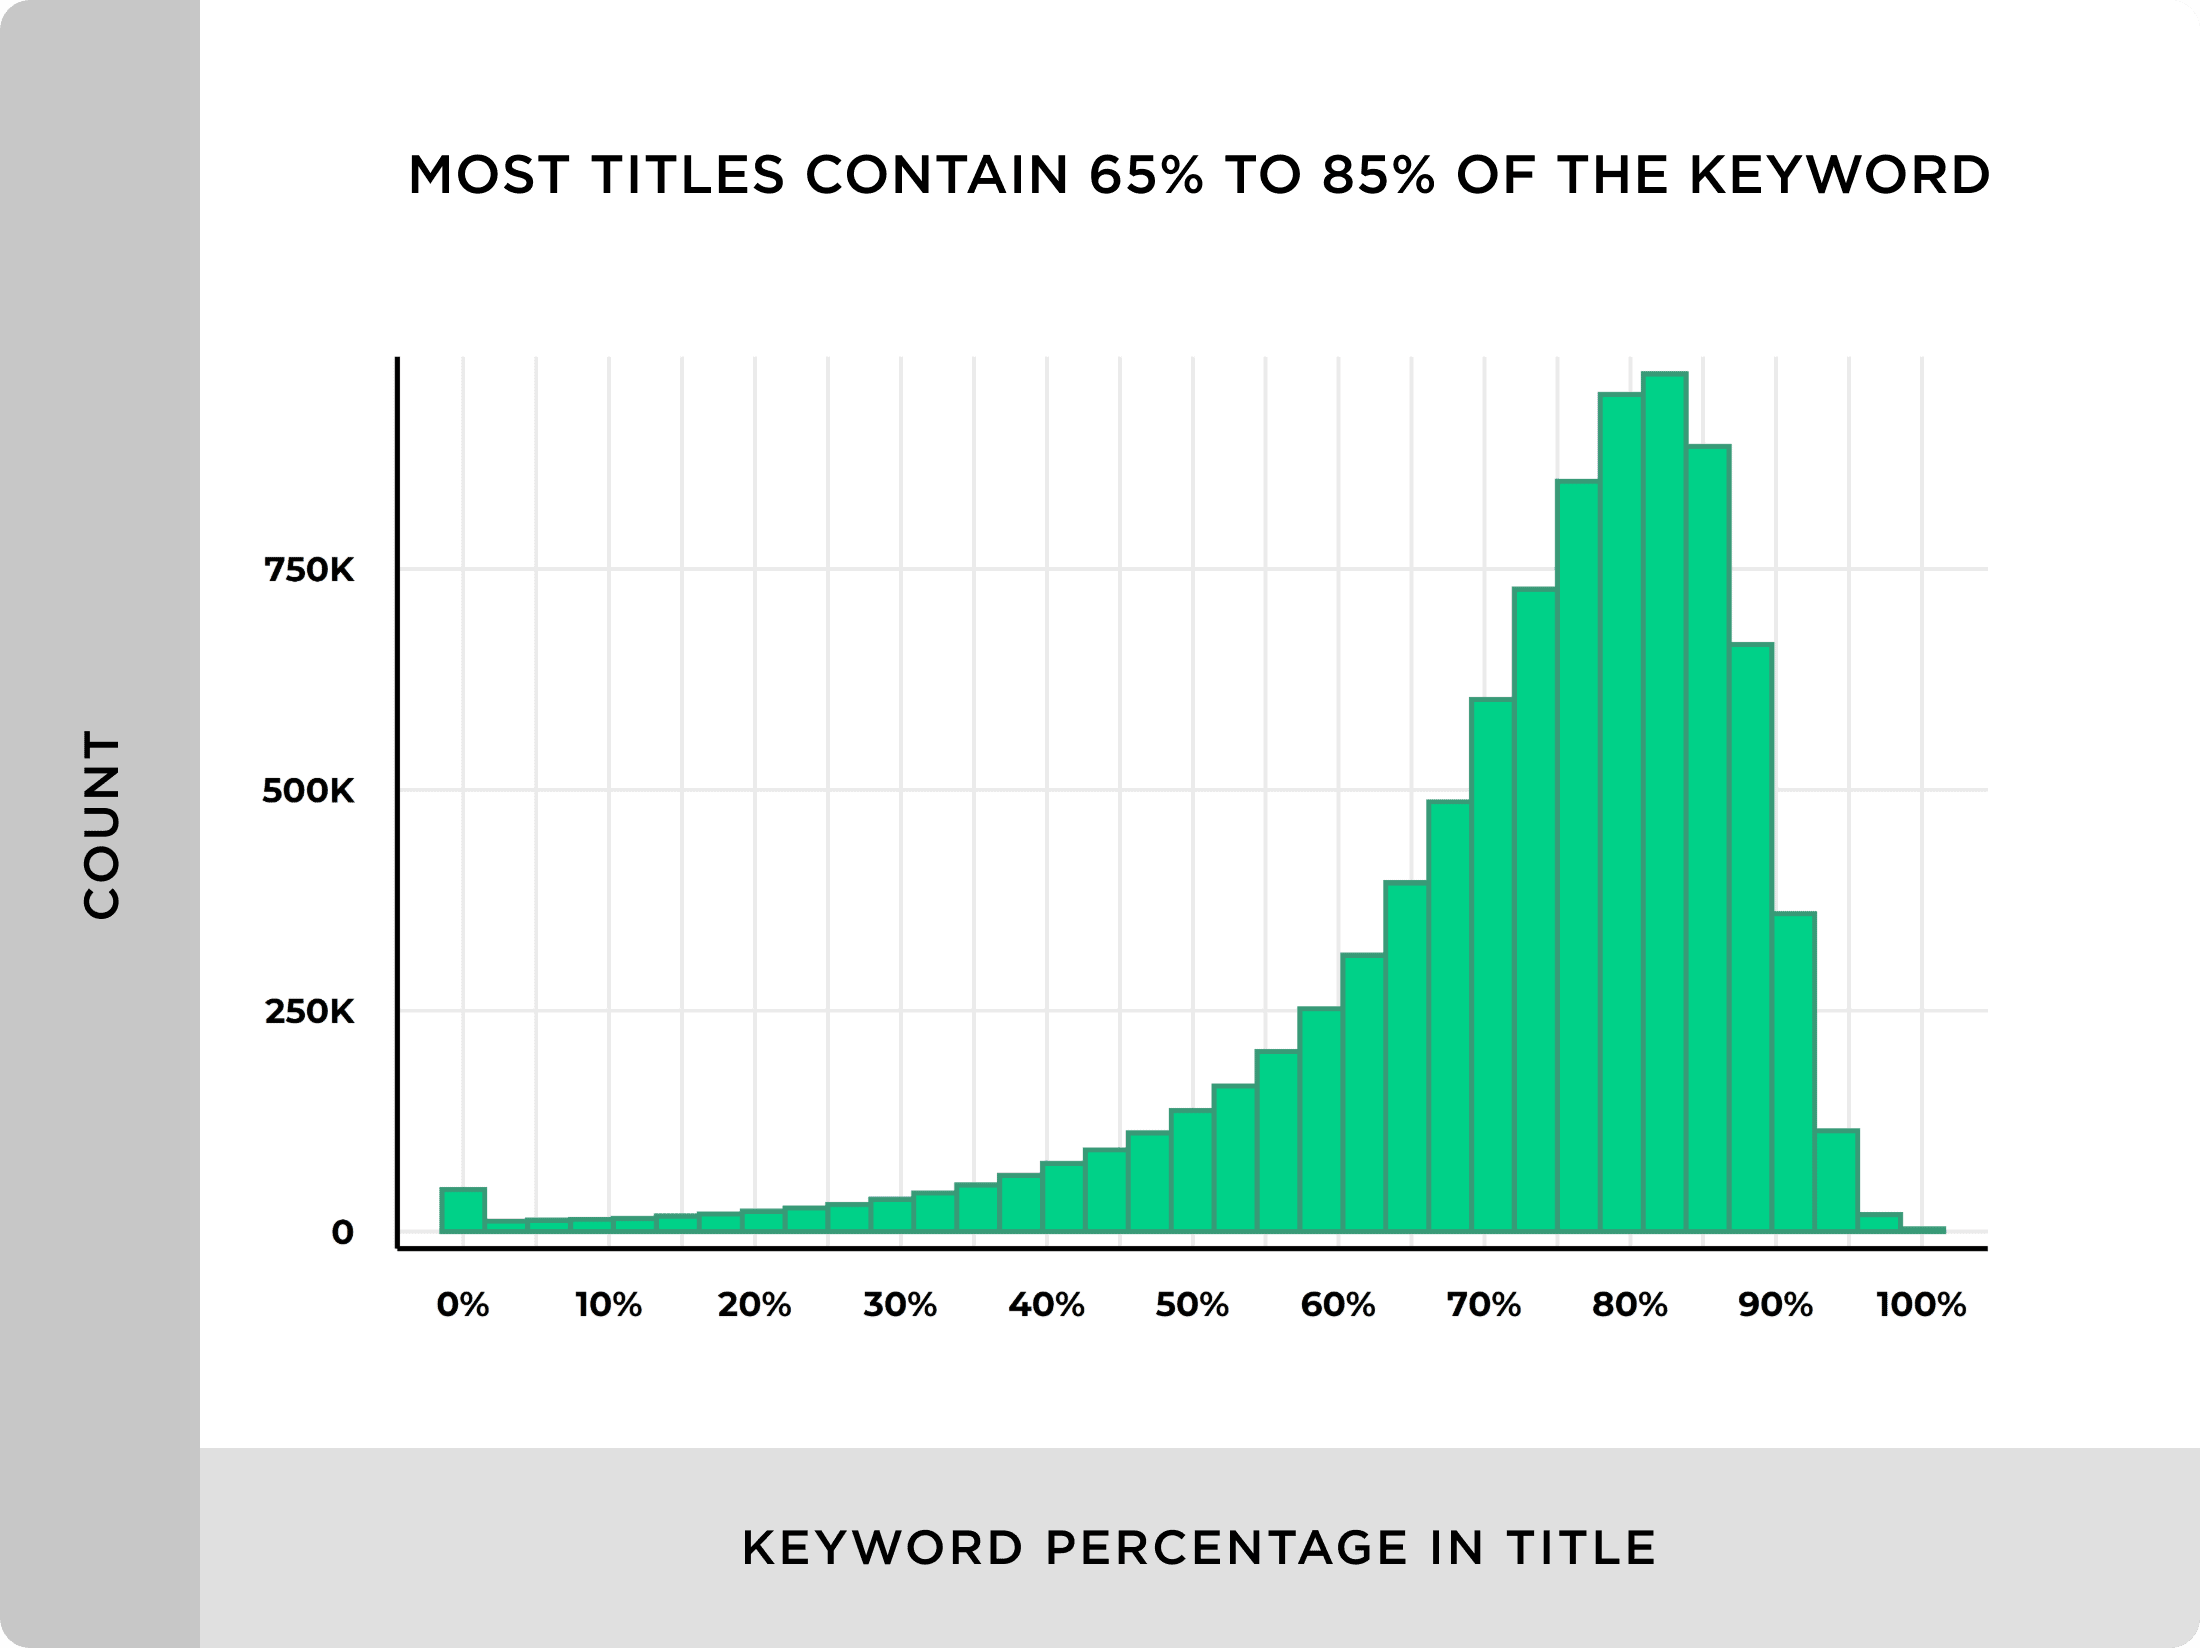 Most titles contain 65 to 85 percent of the keyword